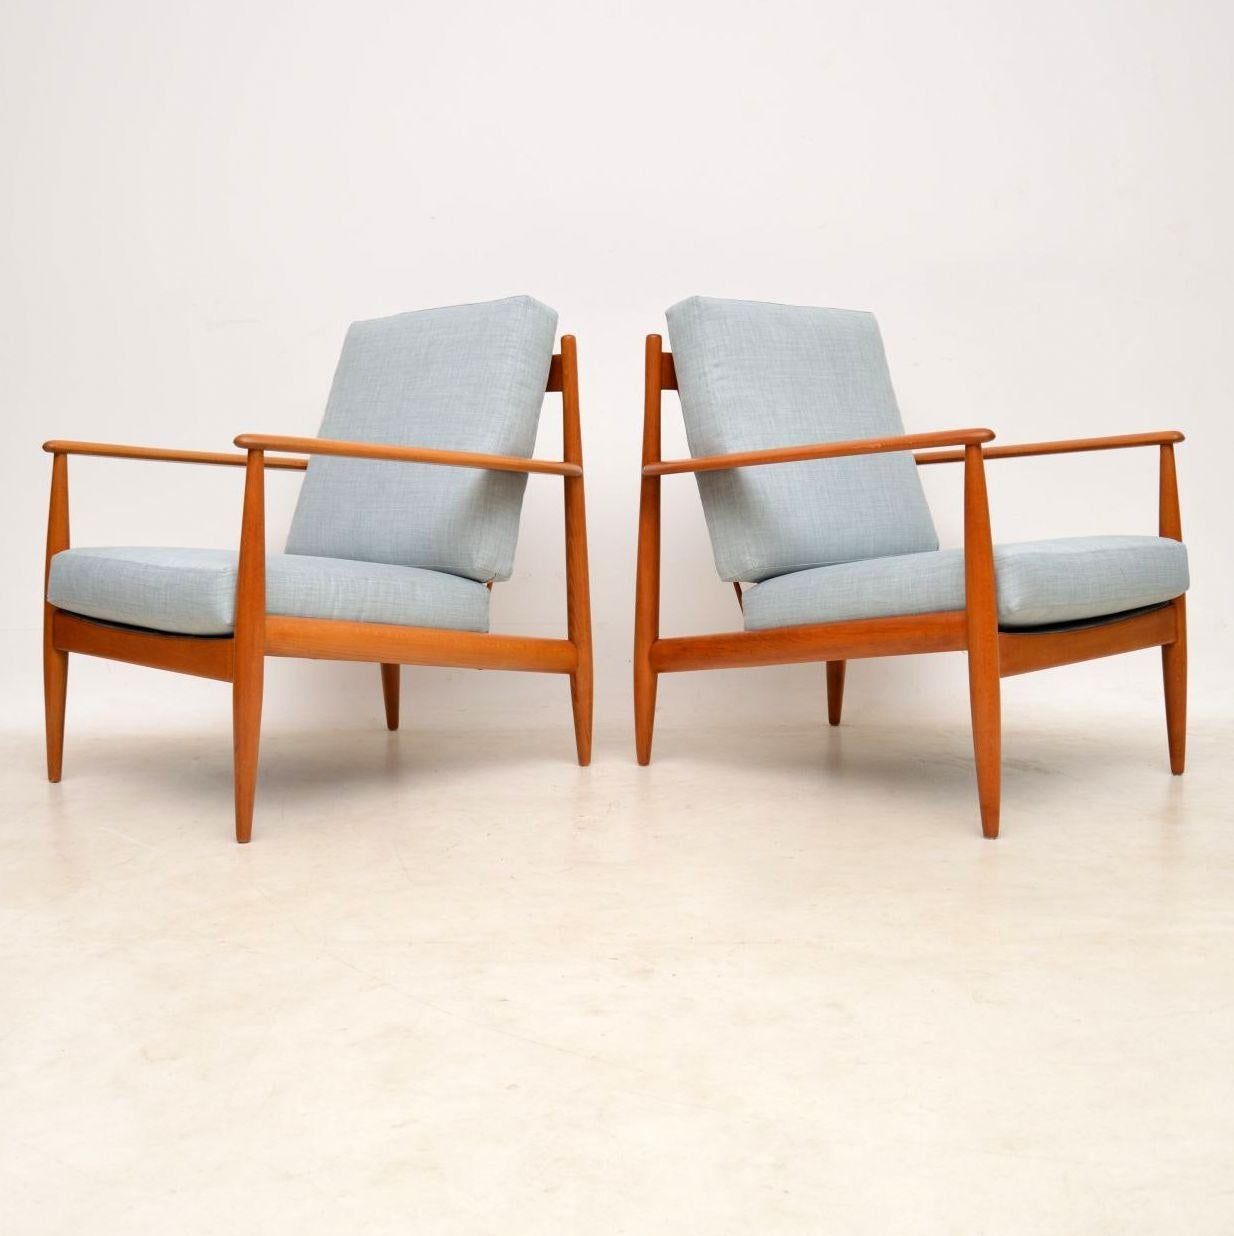 A stylish and extremely well made pair of Danish vintage armchairs, these date from the 1960s. We have had the frames completely stripped and re-polished to a very high standard, the condition is amazing and they have a lovely, warm color. The